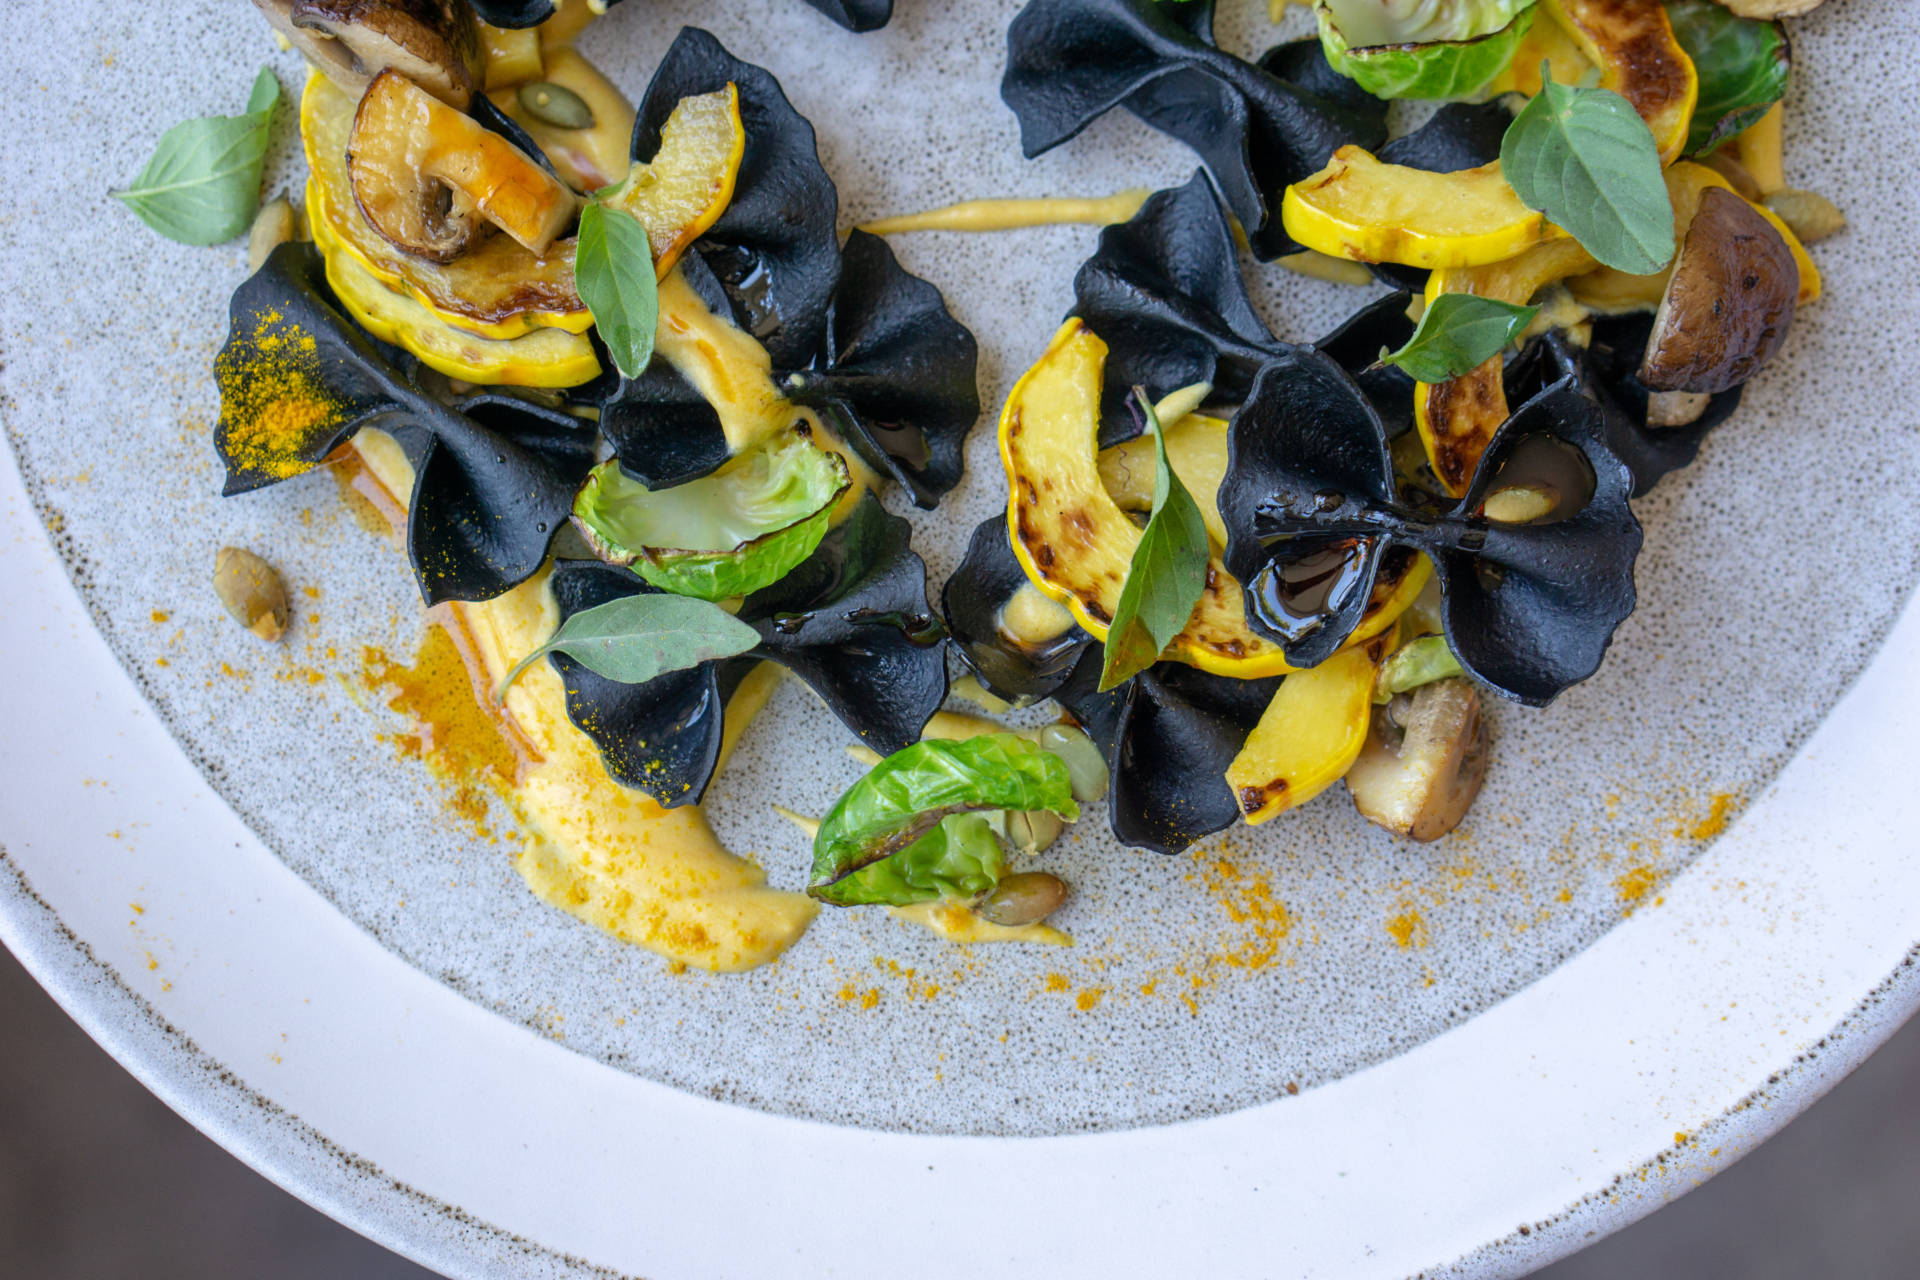 The charcoal farfalle dish from Merchant Roots.